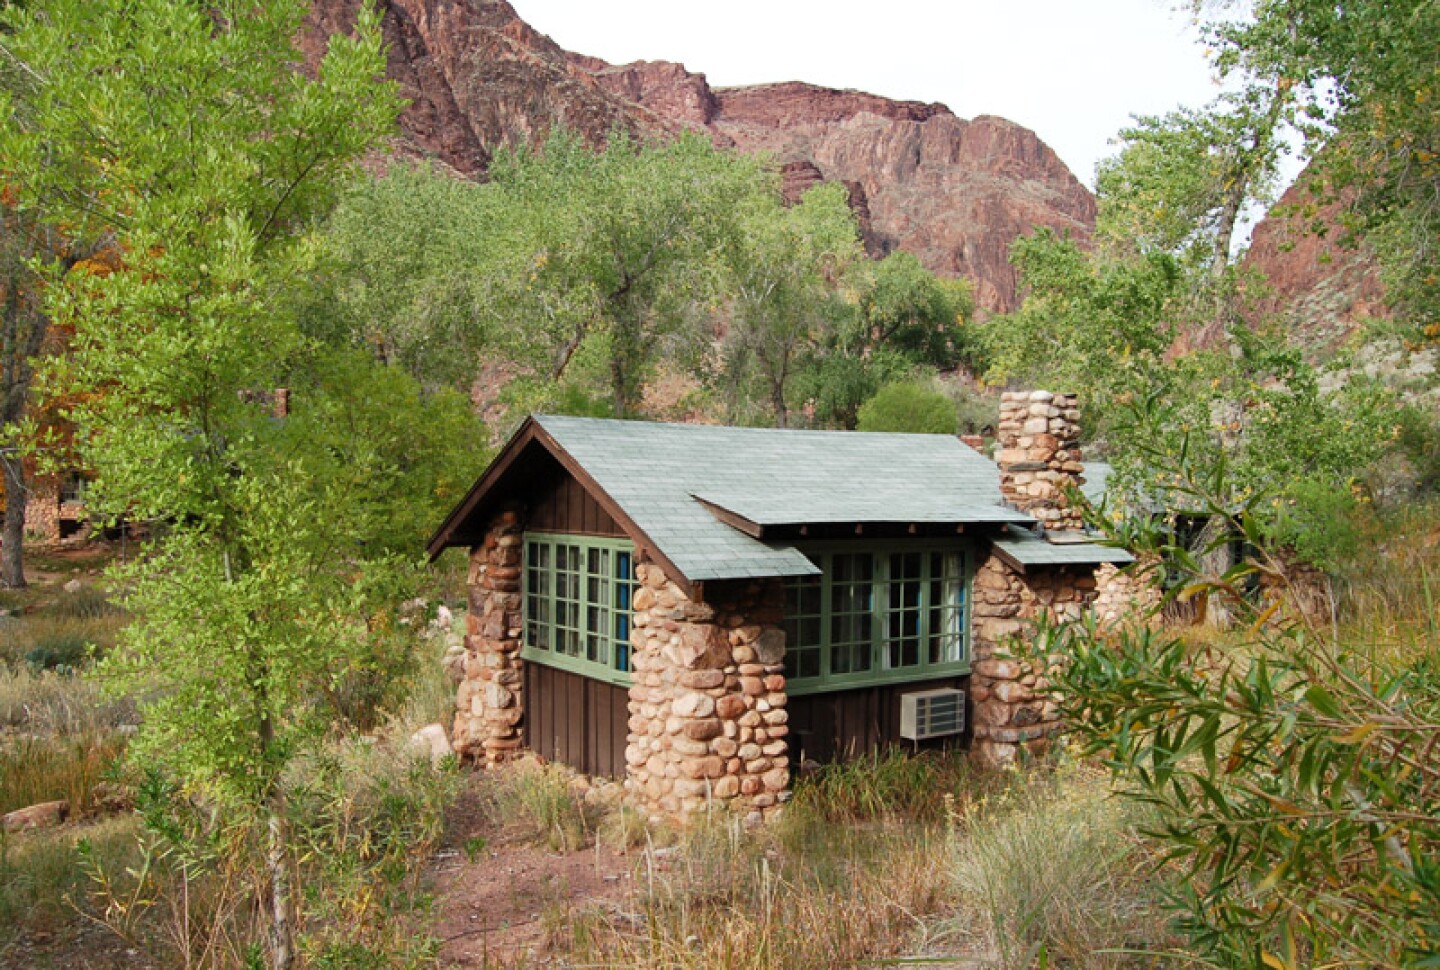 <h2>Phantom Ranch, Grand Canyon National Park</h2> <ul>   <li><b>Book now:</b> <a class="Link" href="https://www.grandcanyonlodges.com/lodging/phantom-ranch/" rel="noopener">Phantom Ranch</a>; $213 per night</li>   <li><b>Book now:</b> <a class="Link" href="https://wildlandtrekking.com/trips/grand-canyon-phantom-ranch-tour/" rel="noopener">Wildland Trekking</a>; from $1,650 per person</li>  </ul> <p>For a truly majestic and worthwhile hiking experience, lace up your boots, stock up on electrolytes, and hike to the bottom of the Grand Canyon in Arizona for a stay alongside the Colorado River at <a class="Link" href="https://www.afar.com/magazine/hiking-phantom-ranch-grand-canyon" rel="noopener">Phantom Ranch</a>. While more rustic than luxurious, these stone cabins still offer essential amenities, including bedding, a private bathroom, and towels, plus heat and air-conditioning. There’s a central shower house, and the Phantom Ranch Canteen is open for breakfast and dinner (you’ll want to order packed lunches for hikes).</p> <p>While with good physical fitness you can hike down either Bright Angel or North Kaibab Trail in one day and back up the next (though you can also stay a few nights), we recommend you stay longer if you can. The views from the bottom of the canyon, including verdant riparian environments along the creeks and river and towering red cliffs on every side, are arguably more impressive than from the rim. Usually, reservations are available only via lottery, which must be entered months in advance. Prefer a guided trip?<a class="Link" href="https://wildlandtrekking.com/trips/grand-canyon-phantom-ranch-tour/" rel="noopener"> Wildland Trekking</a>, a third-party tour operator, offers an all-inclusive two- or three-day hike and stay at Phantom Ranch.</p>